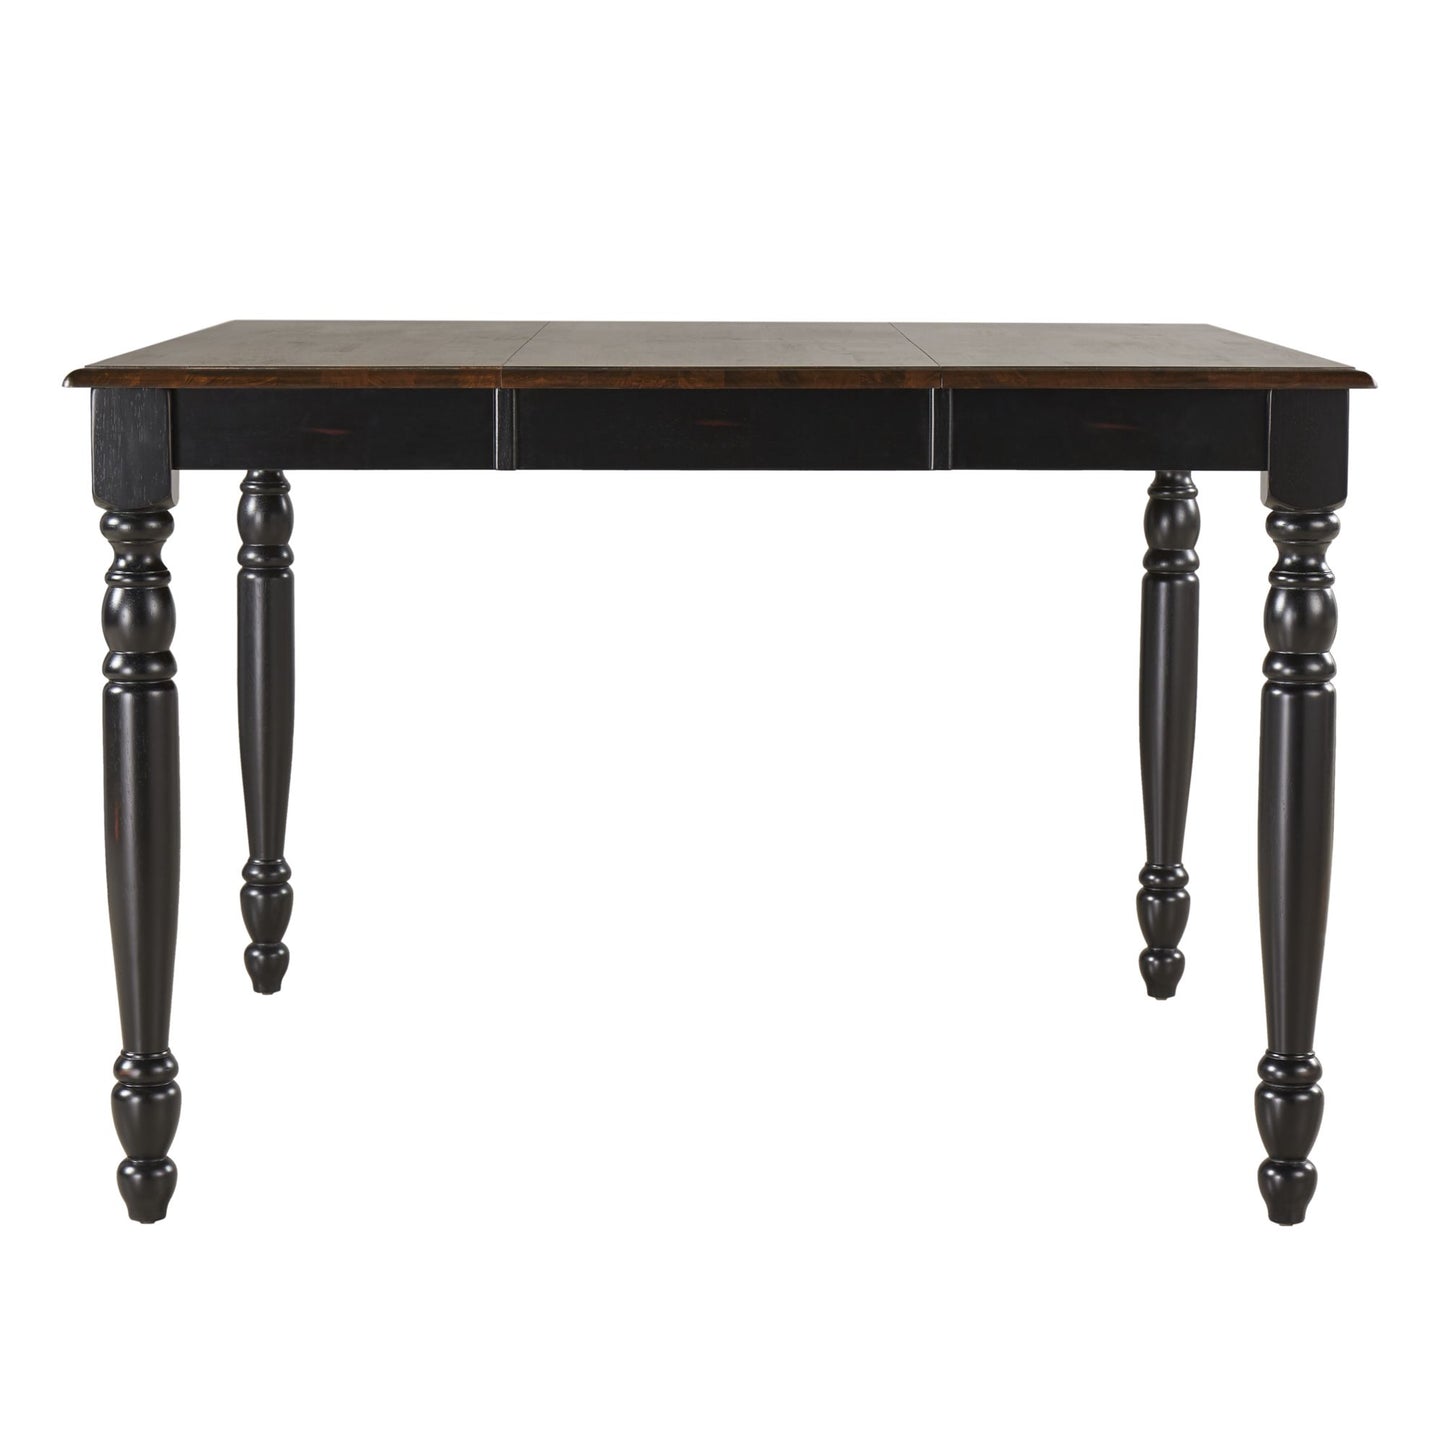 36"-54" Two-Tone Extending Counter Height Dining Table - Antique Black with Cherry Top Finish